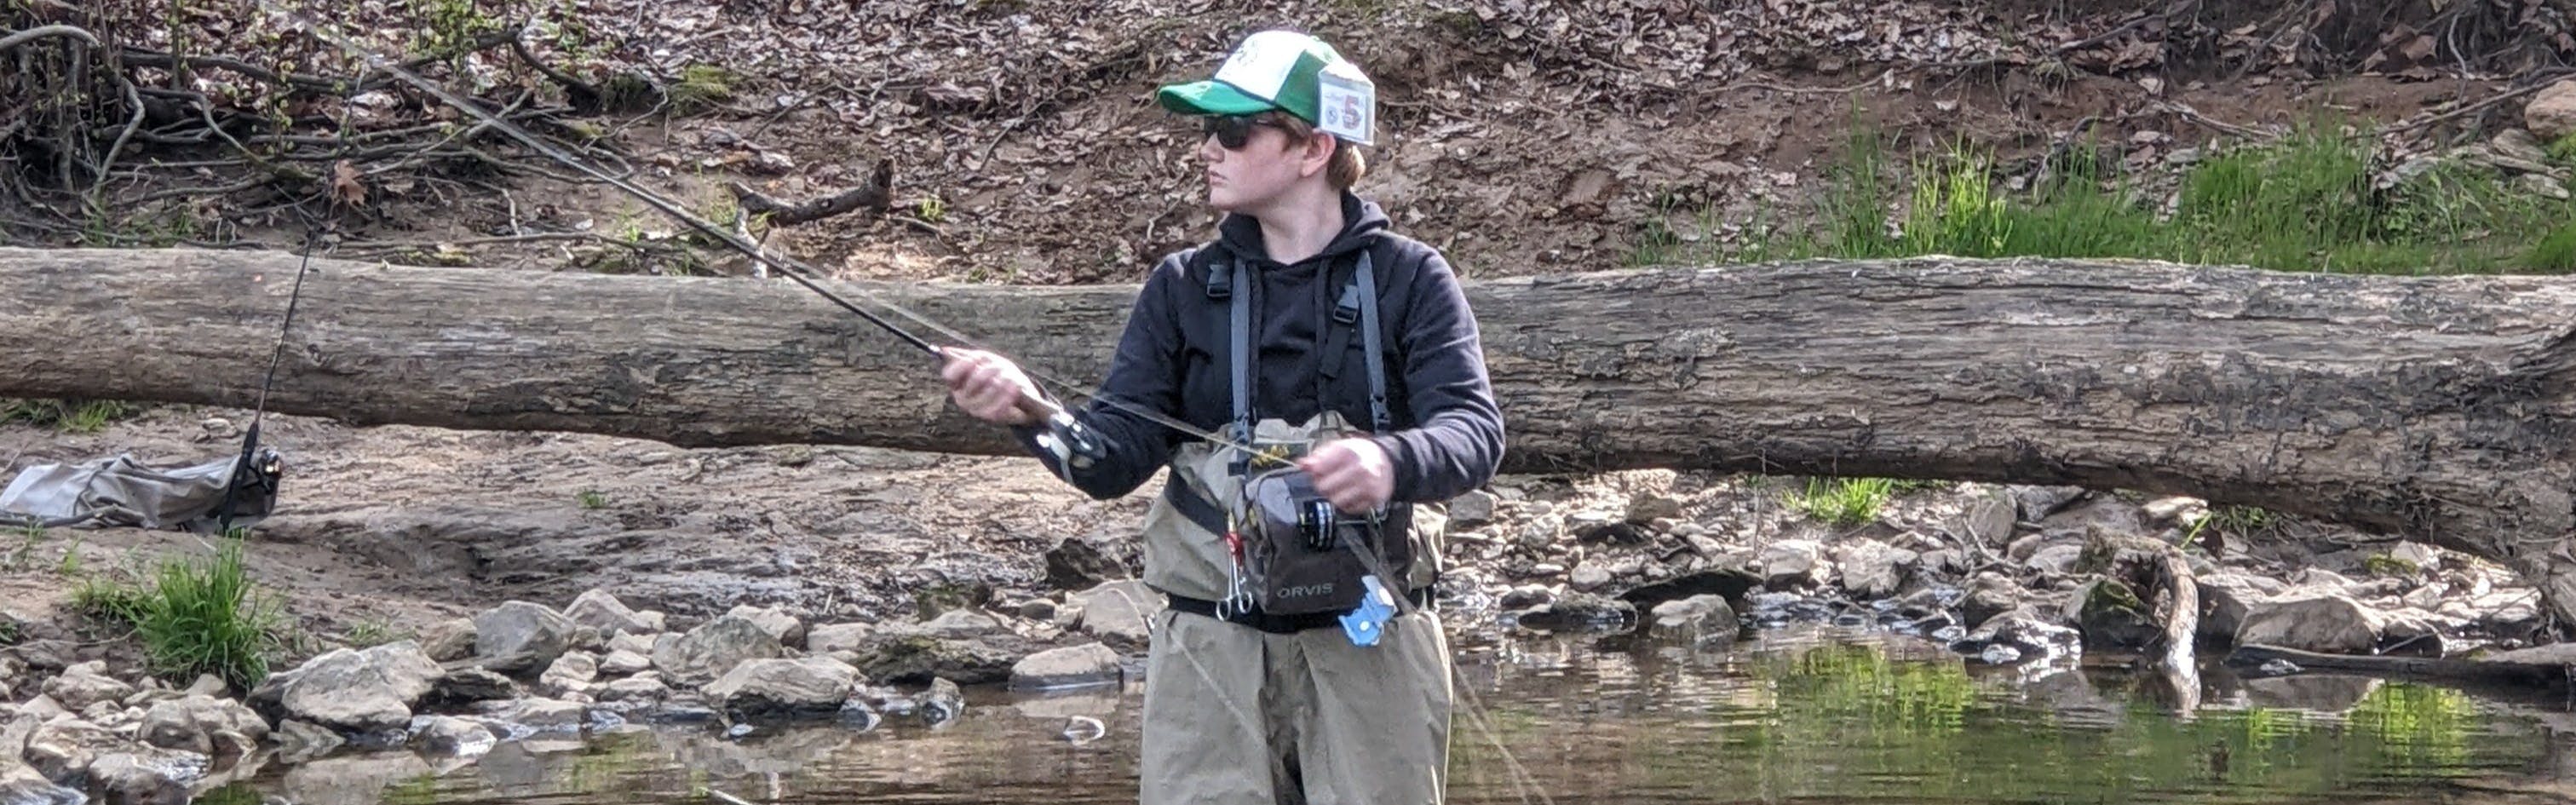 A boy casts a fly fishing rod into a river. He is wearing waders and a hat.